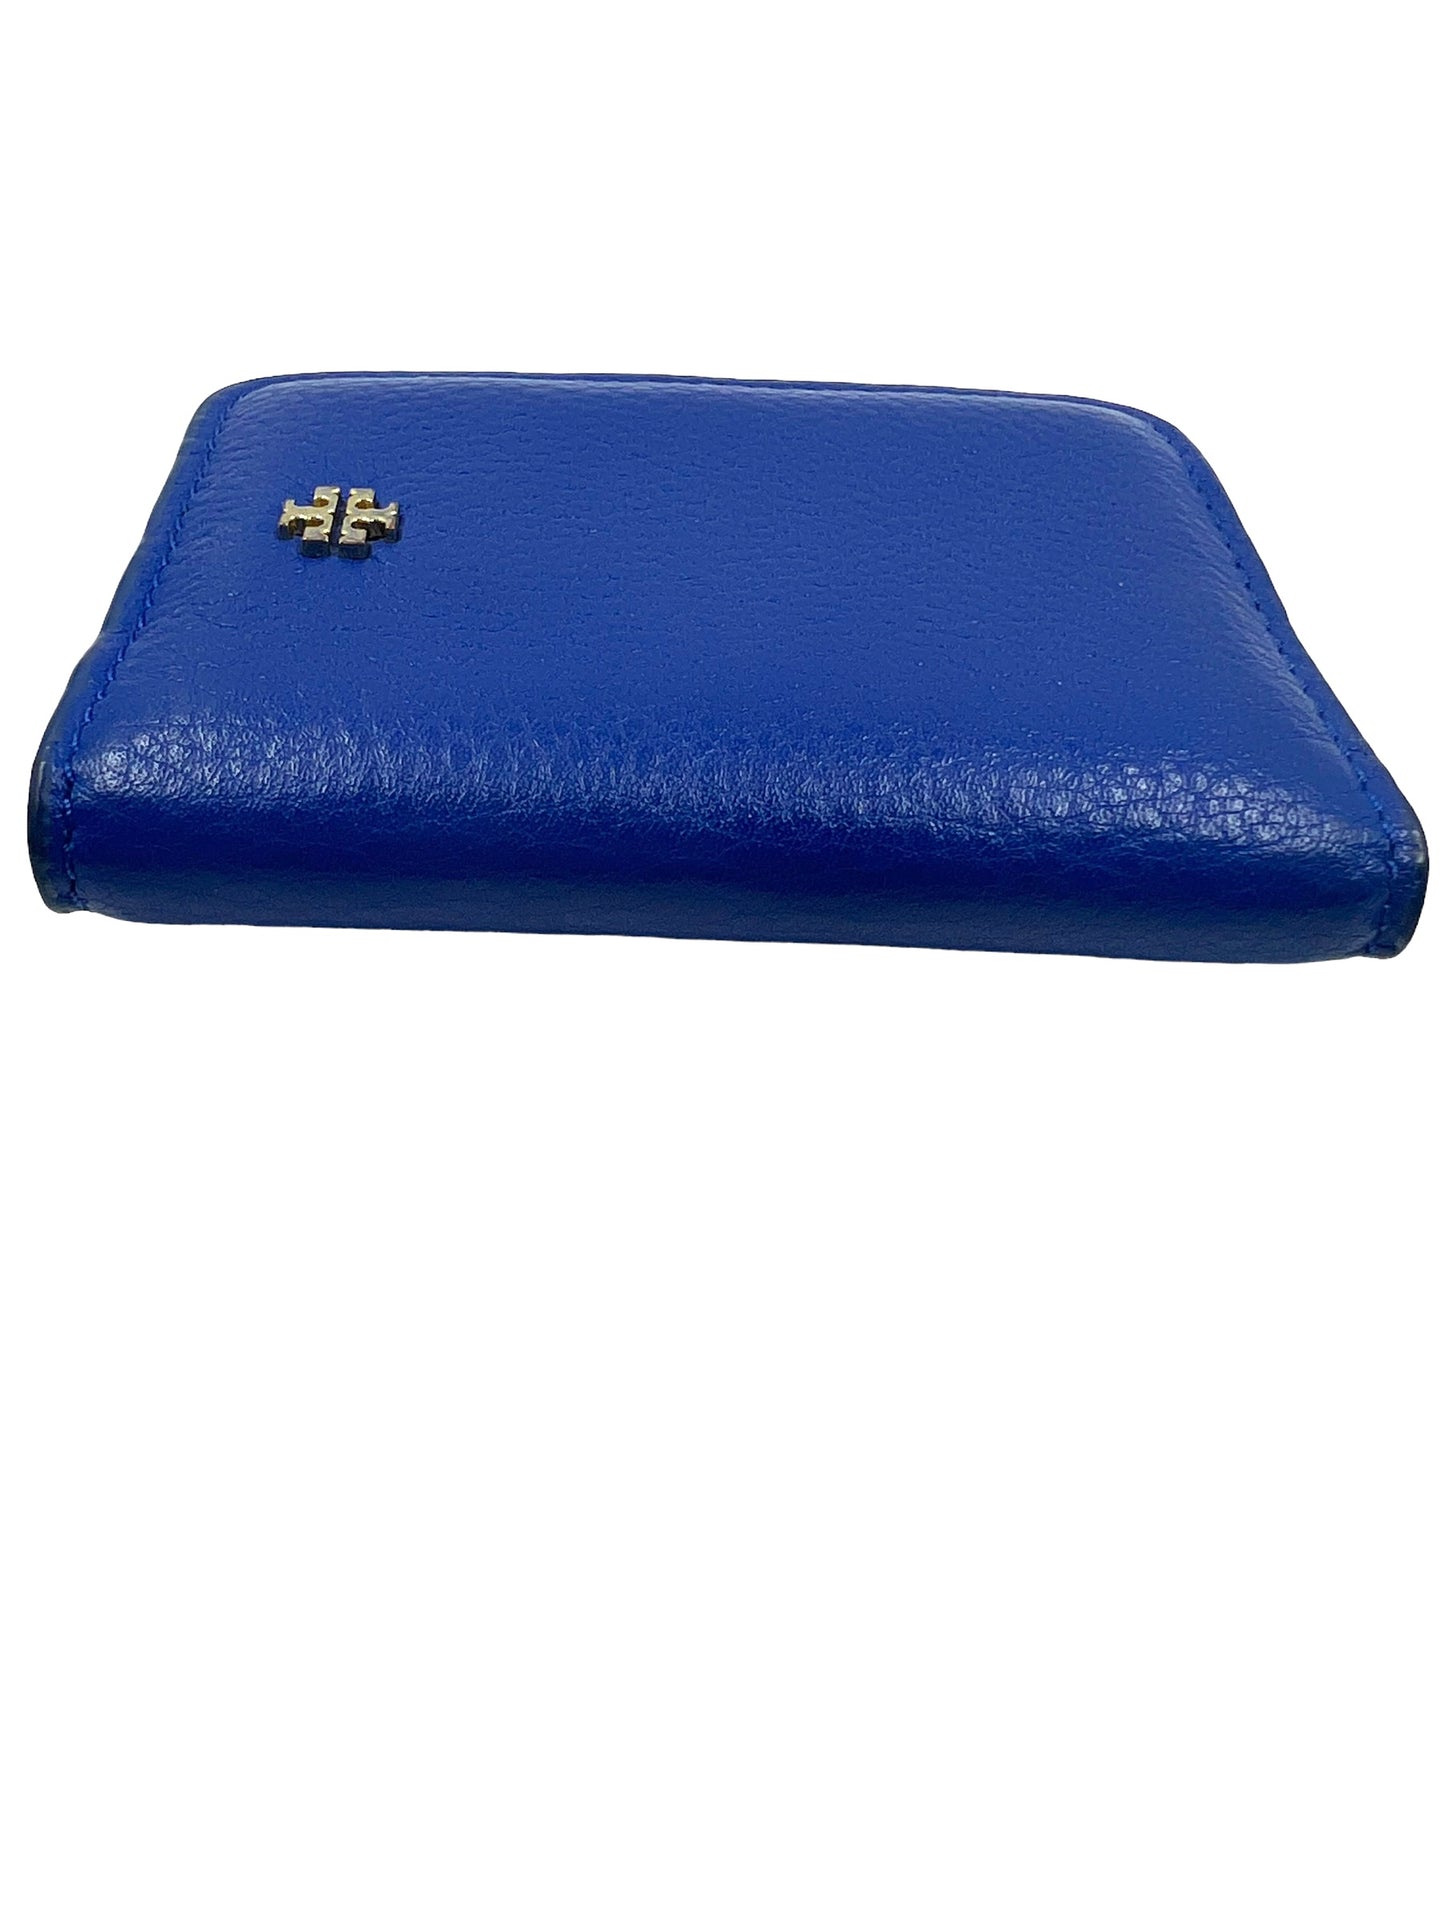 Tory Burch Blue Leather Cardholder